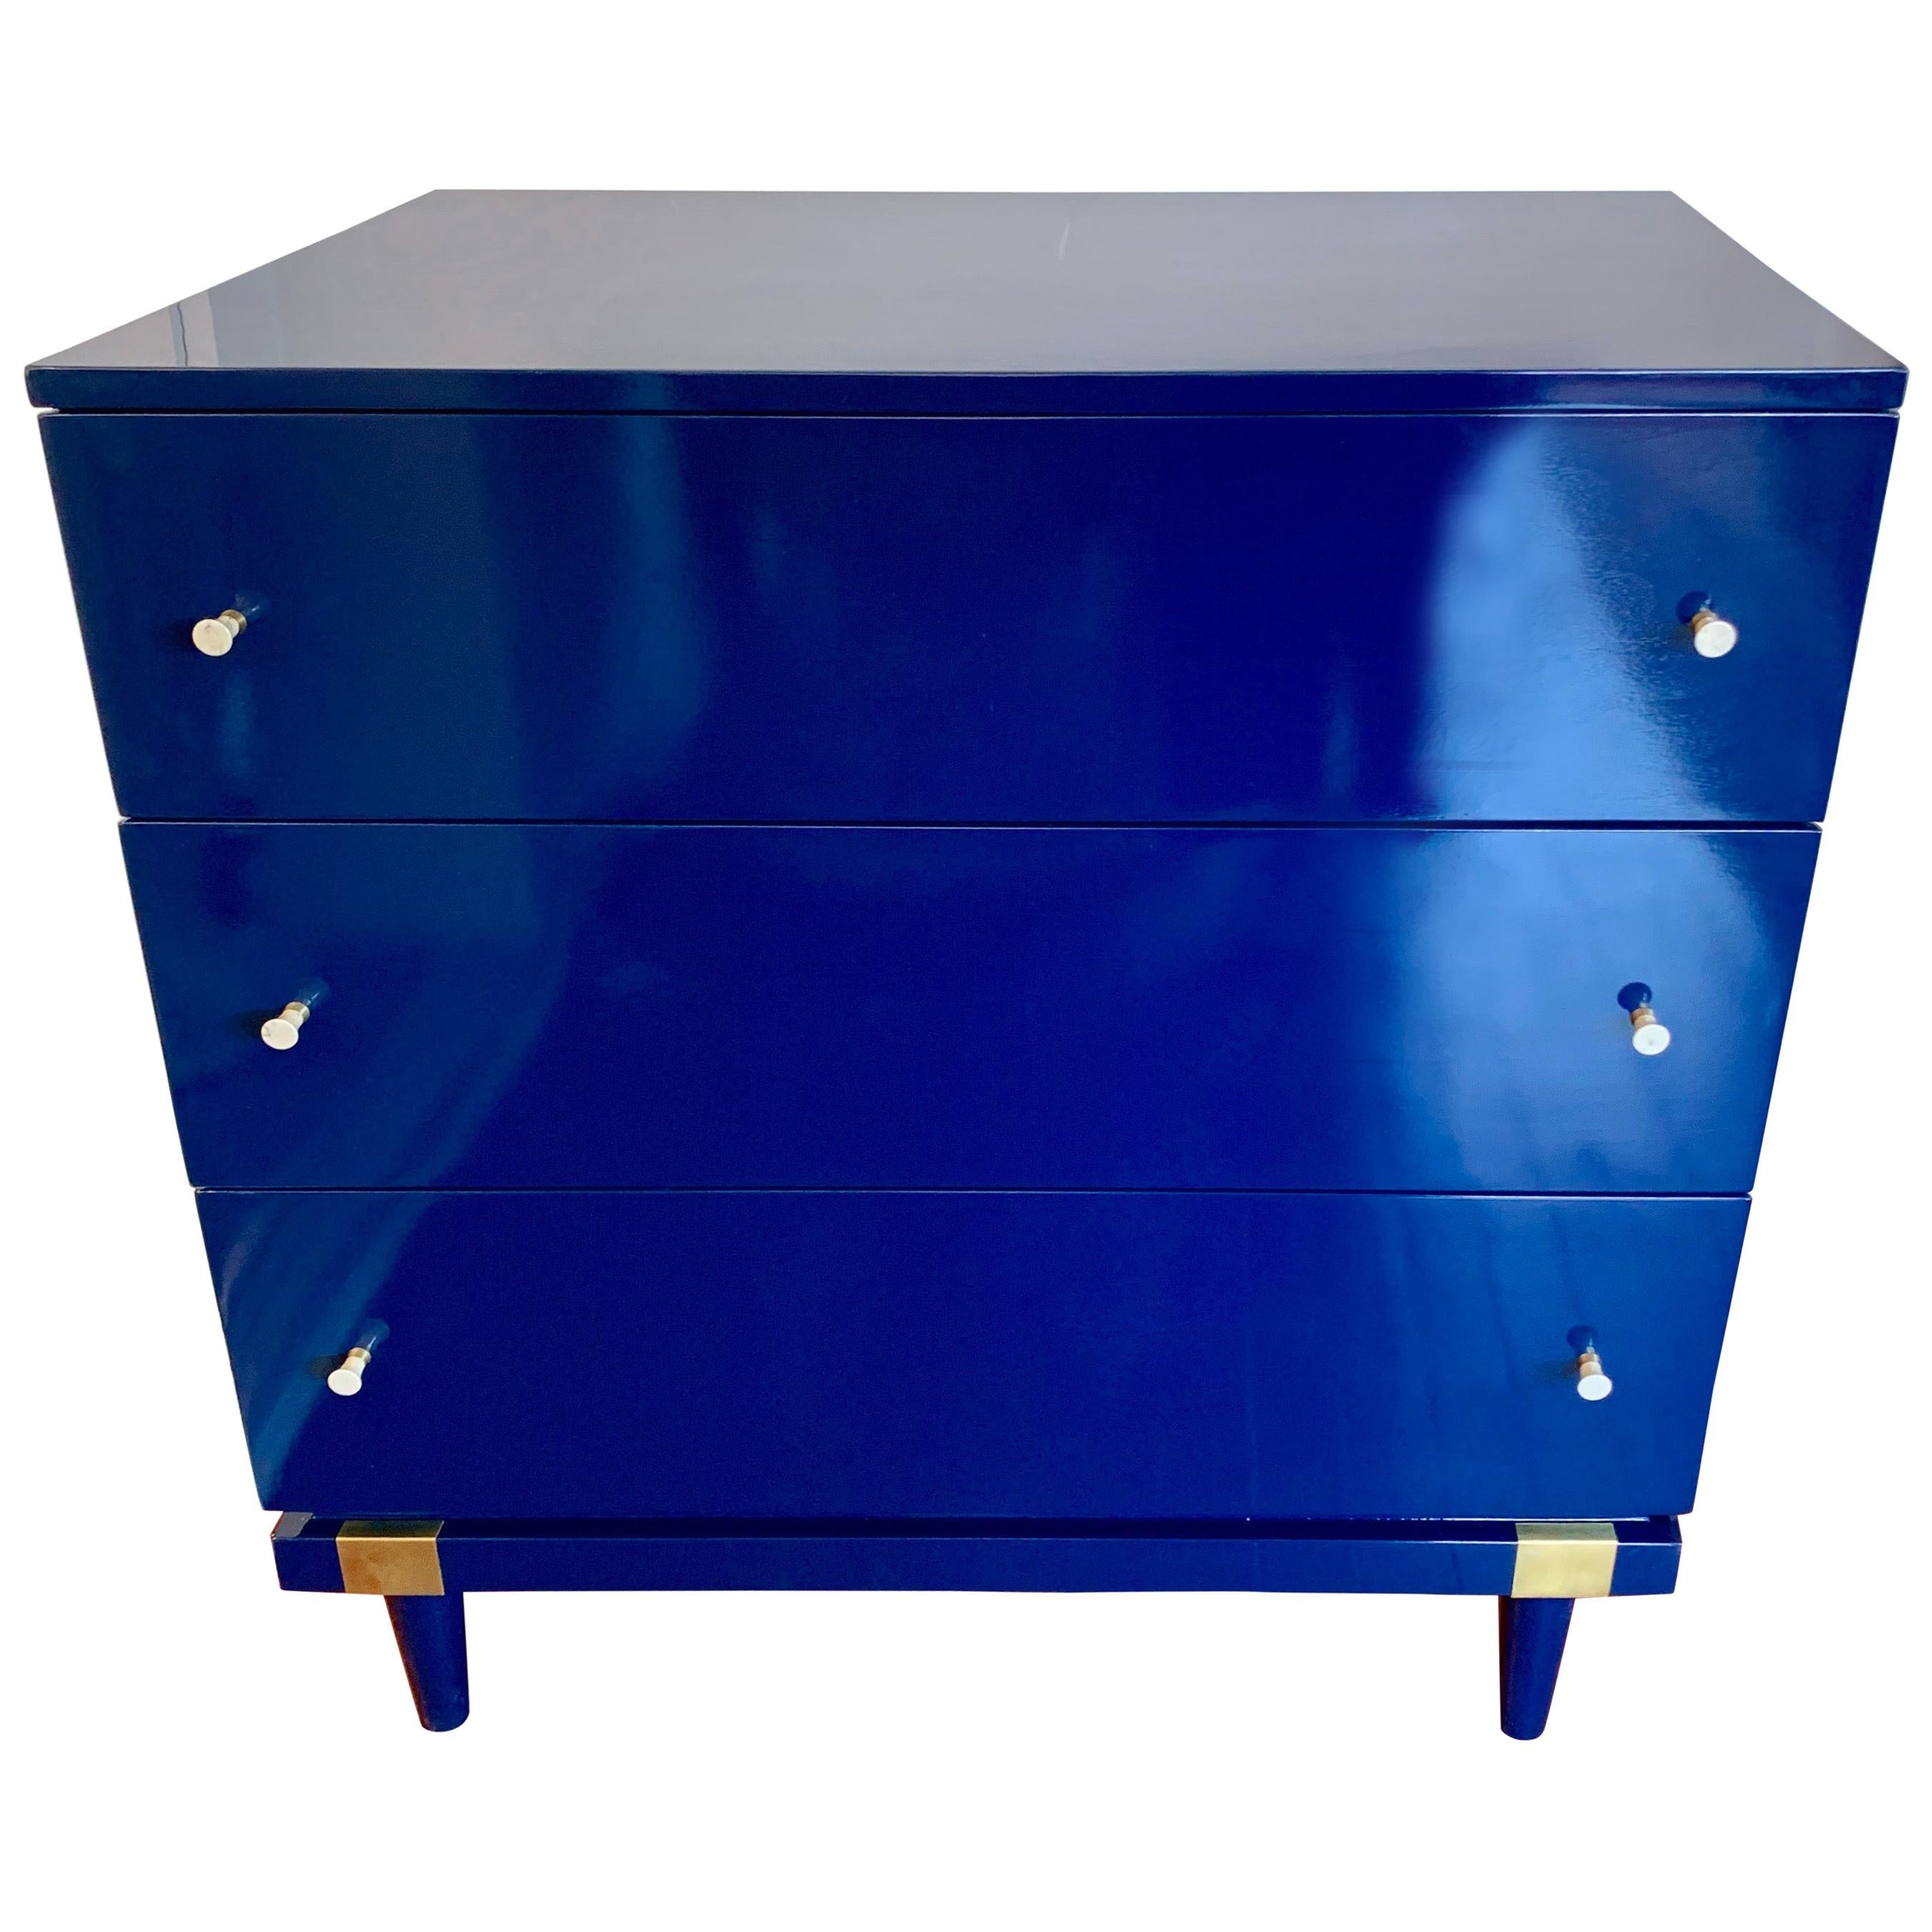 Mengel Blue Lacquered Raymond Loewy Designed Chest of Drawers Dresser Commode